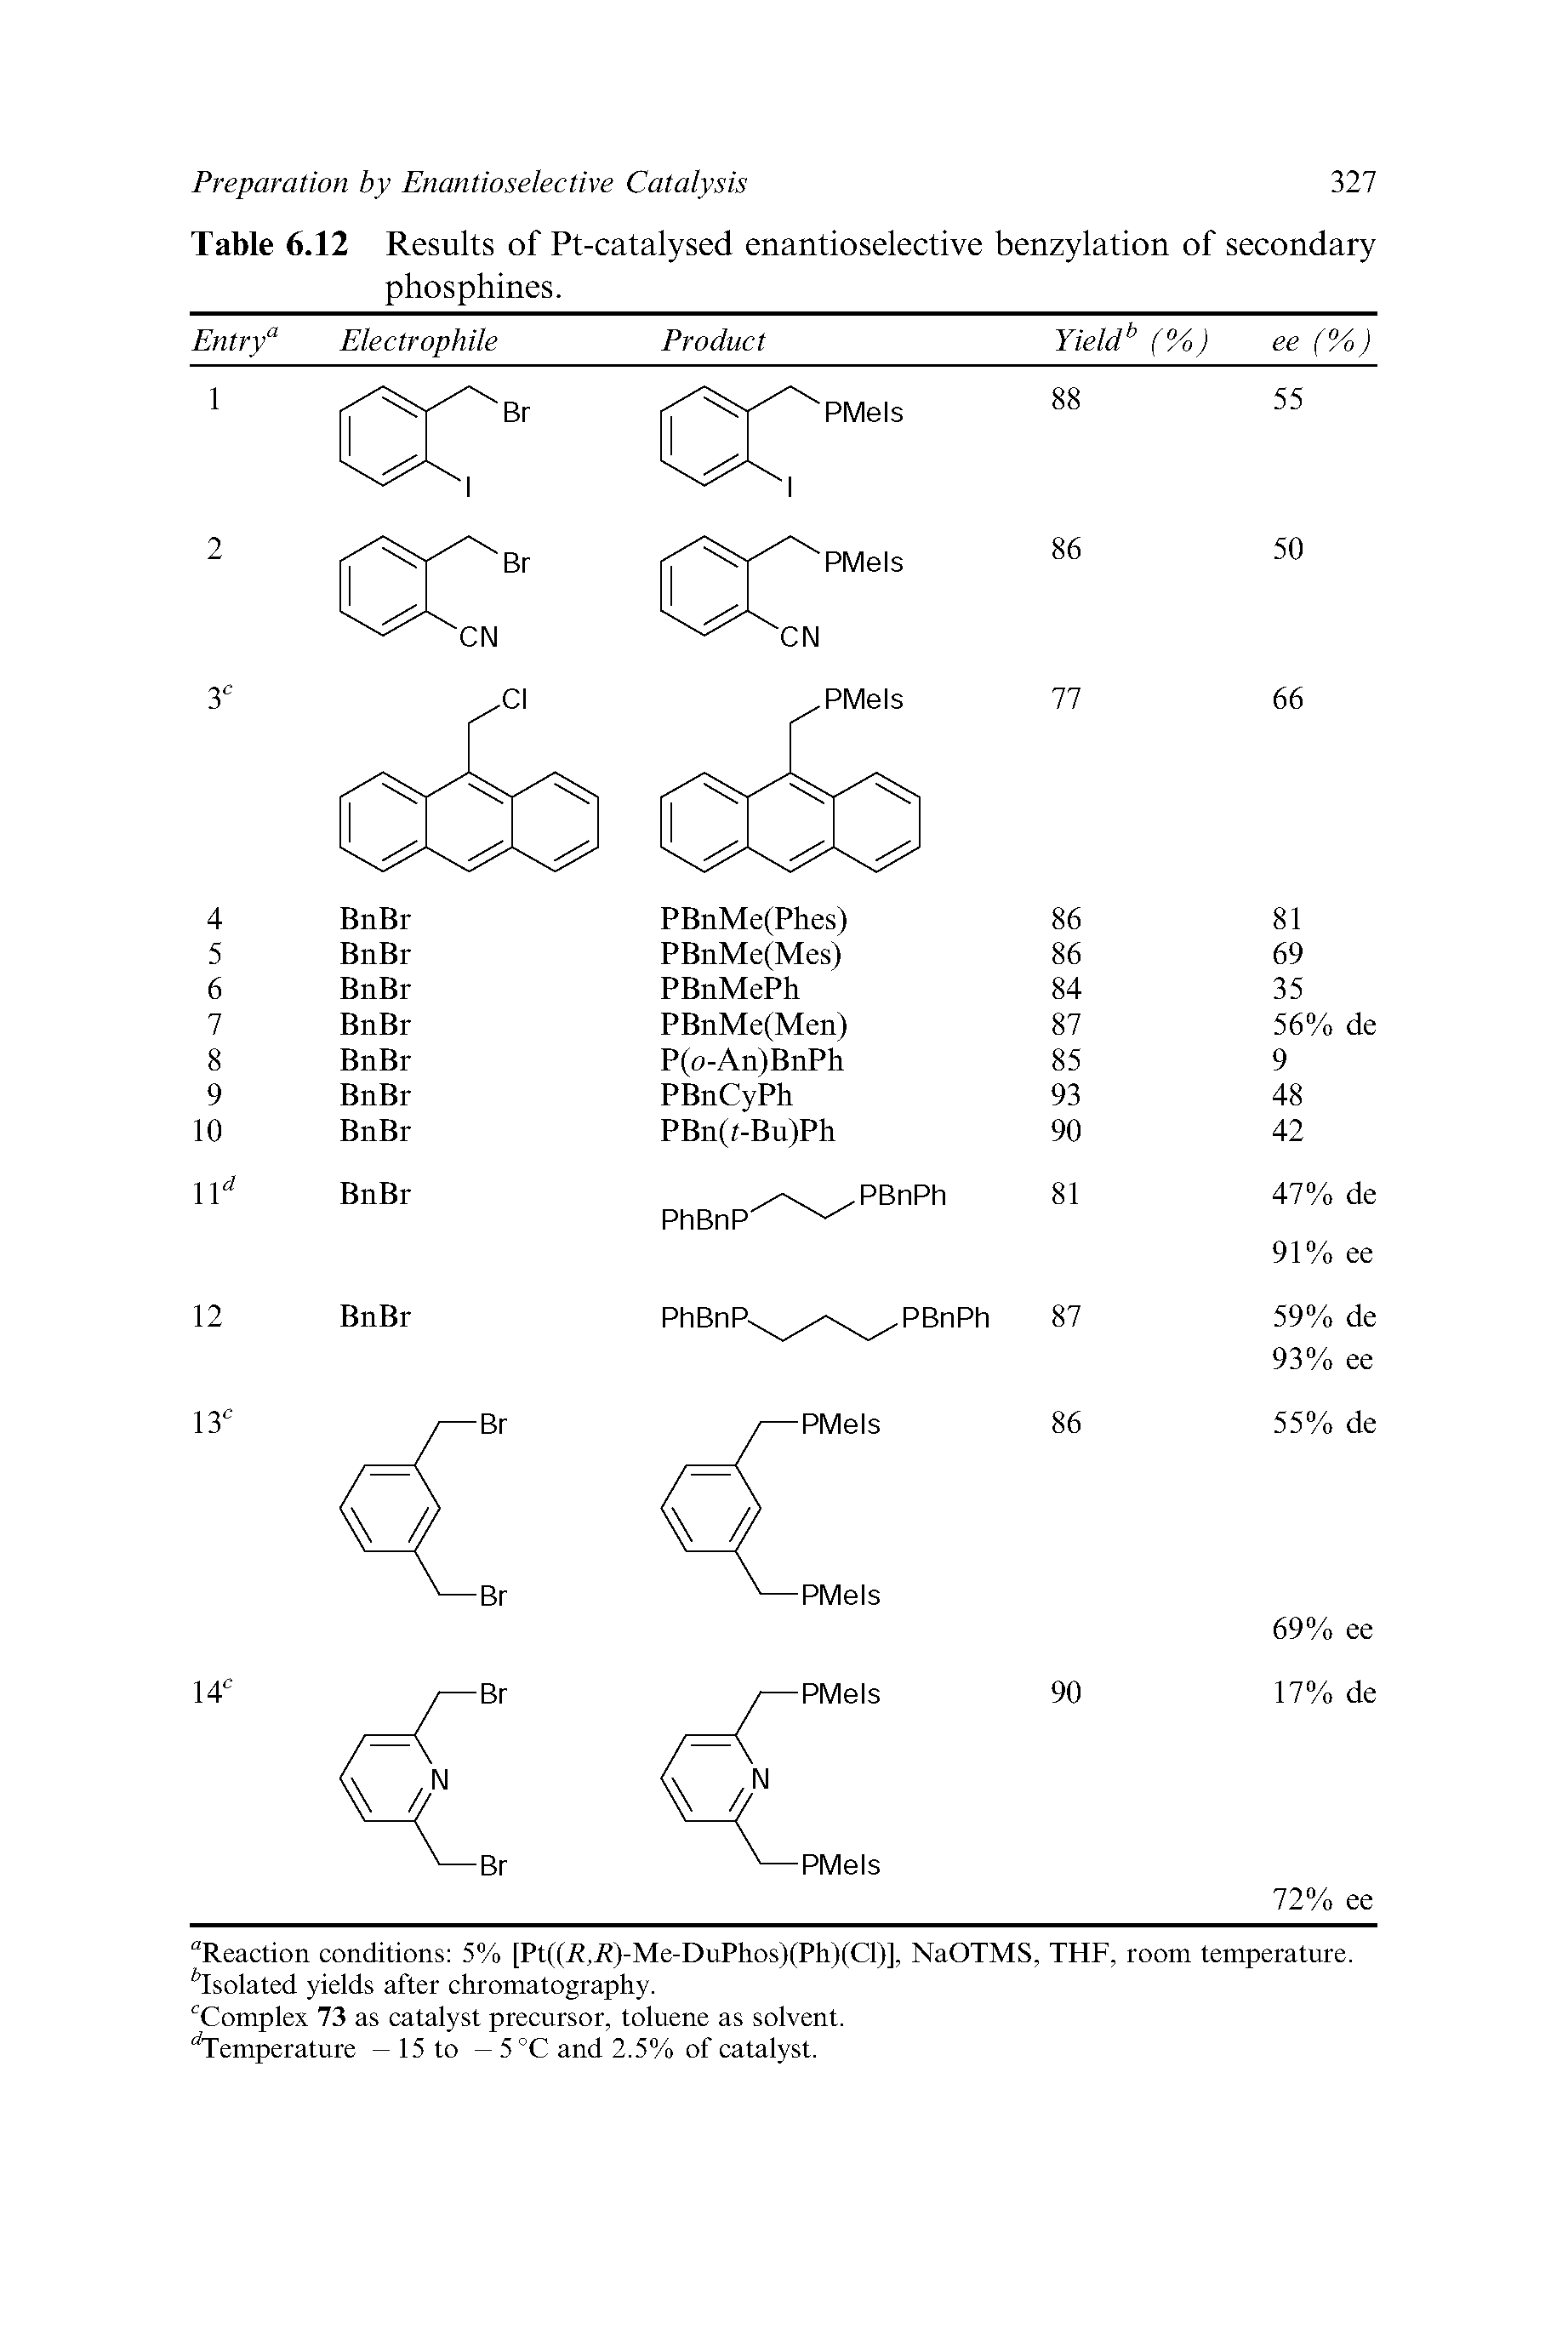 Table 6.12 Results of Pt-catalysed enantioselective benzylation of secondary phosphines.